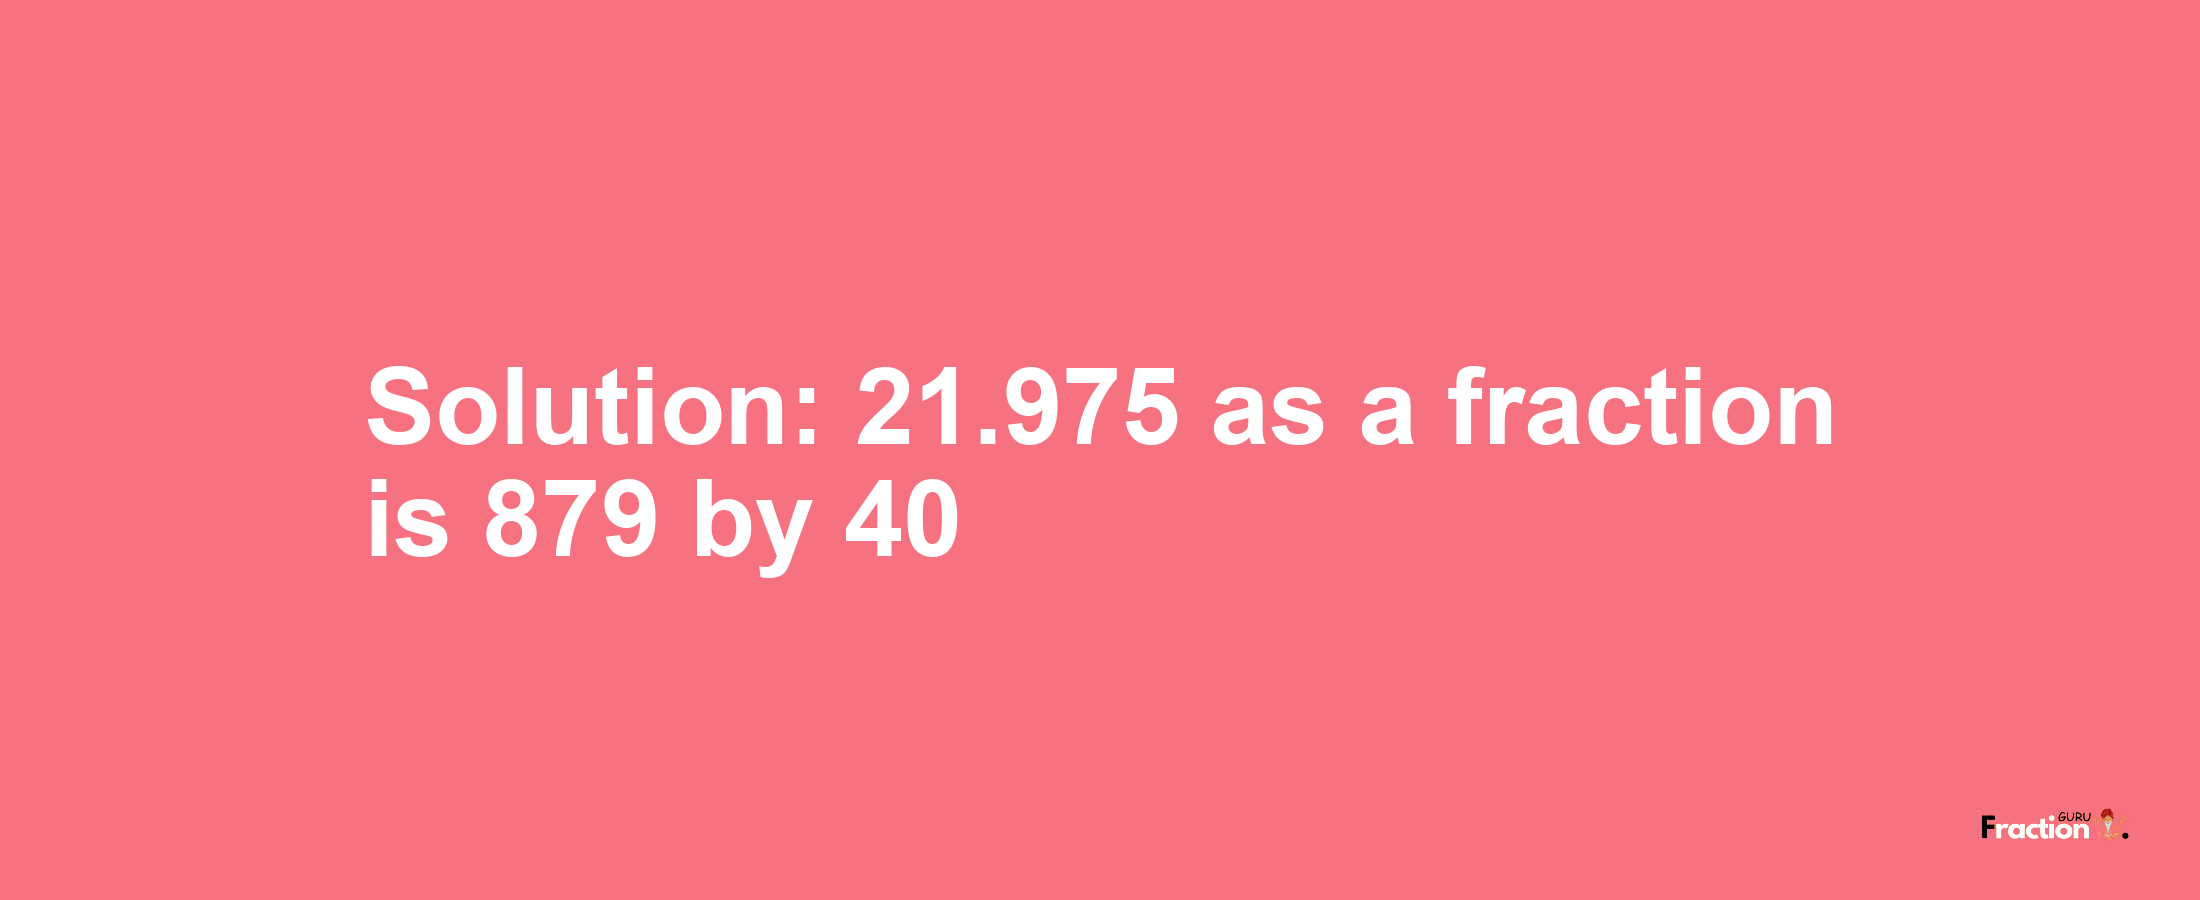 Solution:21.975 as a fraction is 879/40